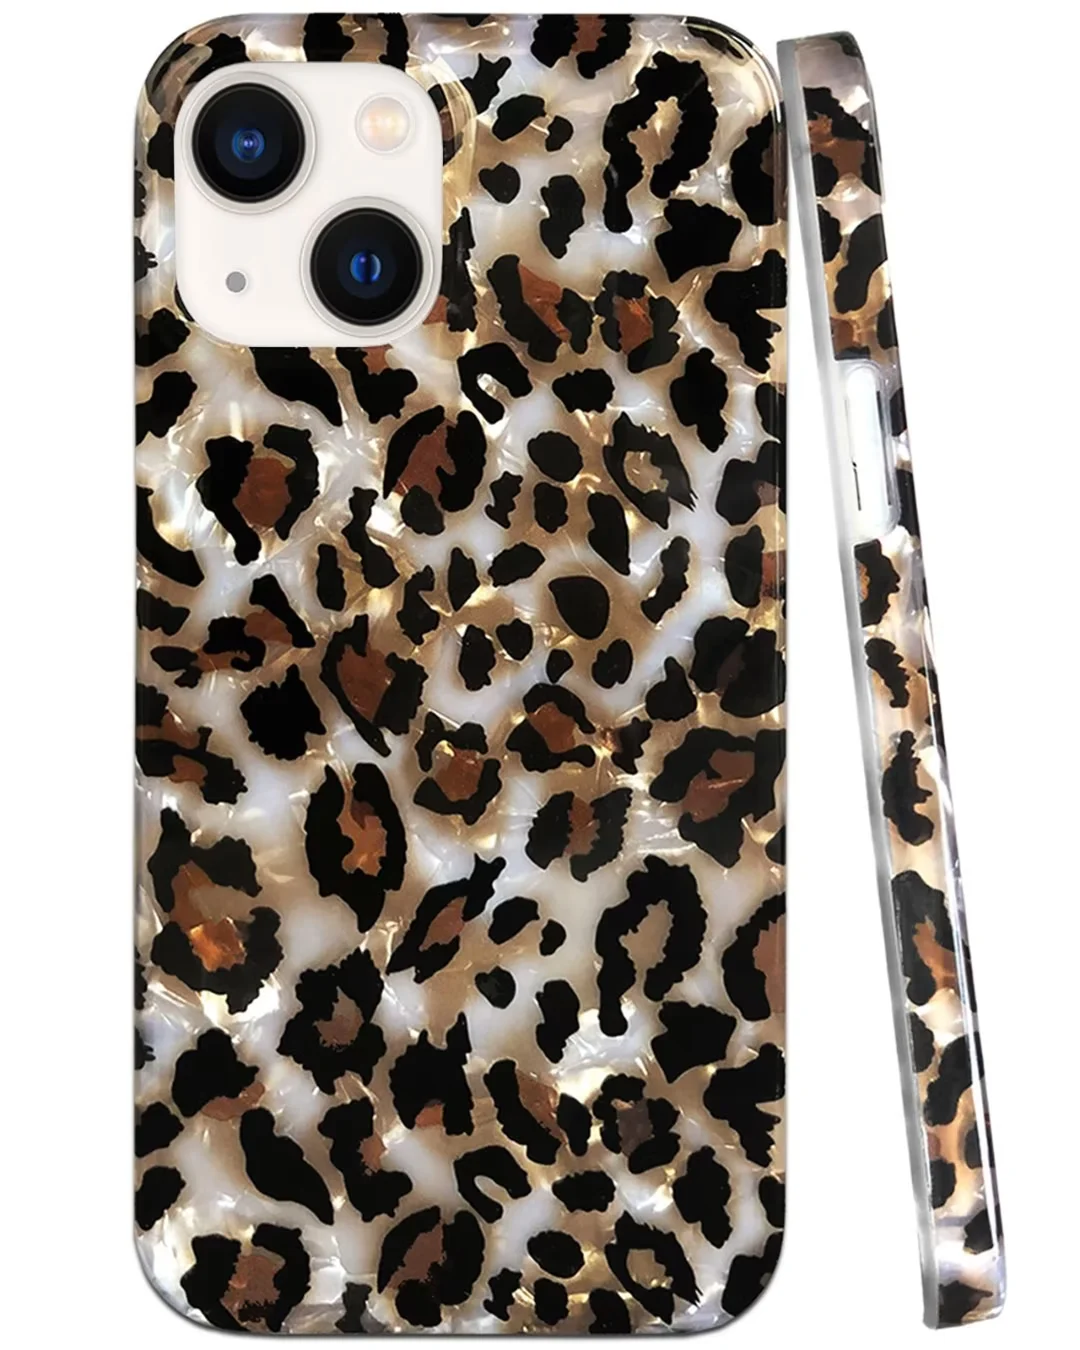 J.west iPhone 8 Plus/iPhone 7 Plus 5.5-inch Case, Luxury Sparkle  Translucent Clear Leopard Cheetah Print Pearly Design Soft Silicone Slim  TPU